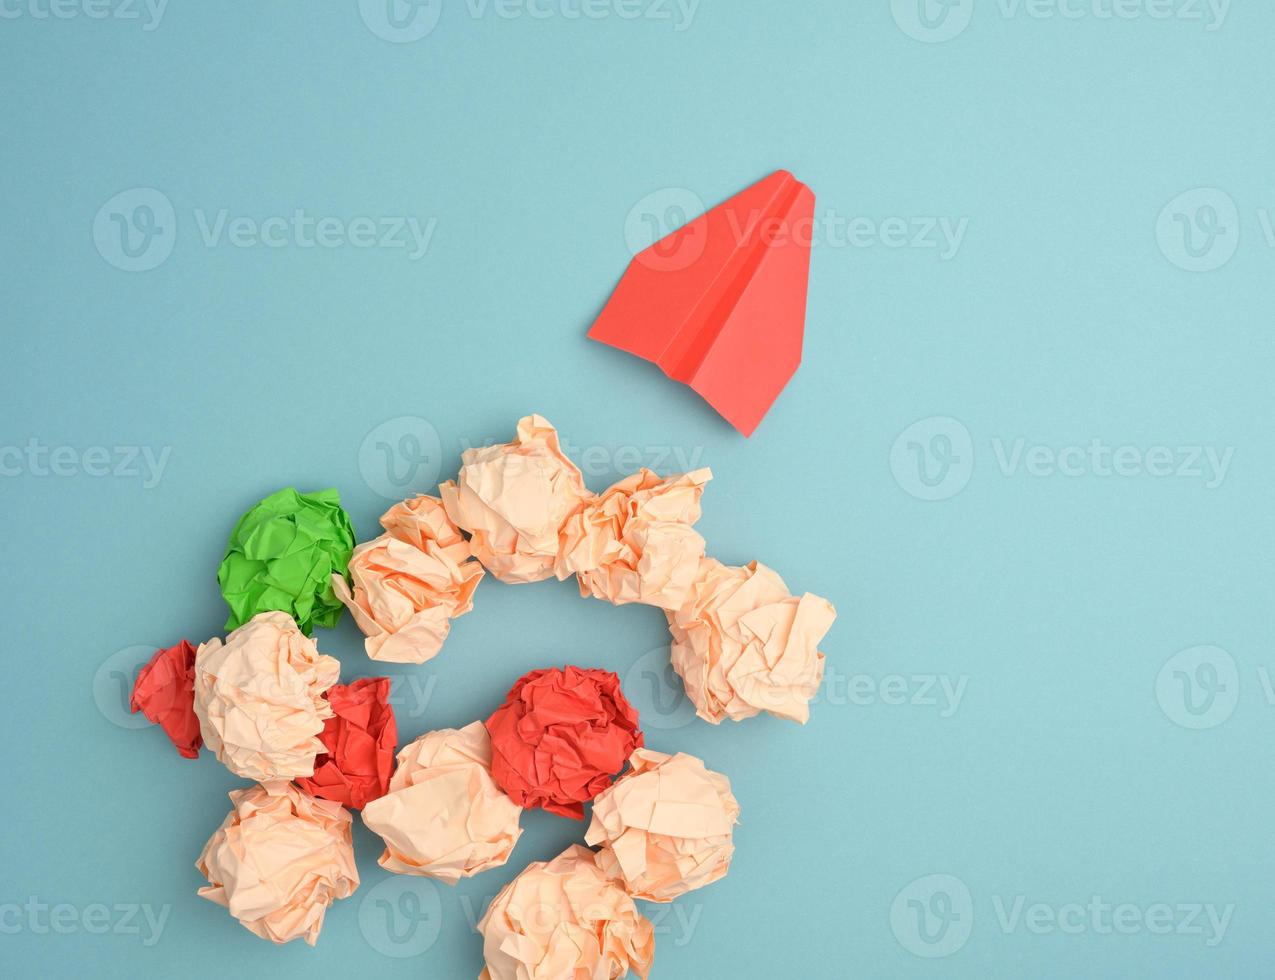 red paper airplane and crumpled paper balls on a blue background, top view. photo